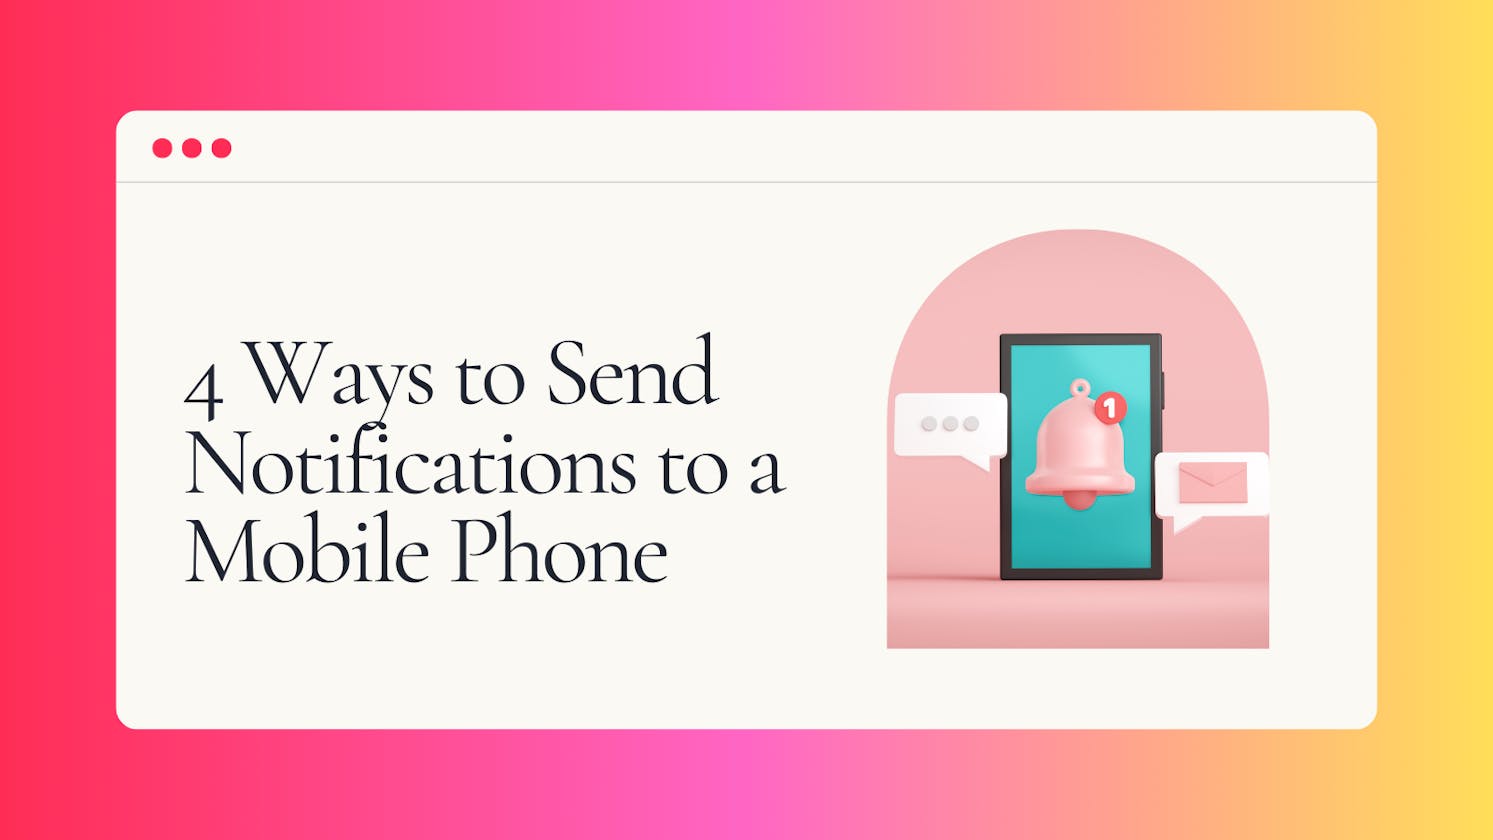 4 Ways to Send Notifications to a Mobile Phone